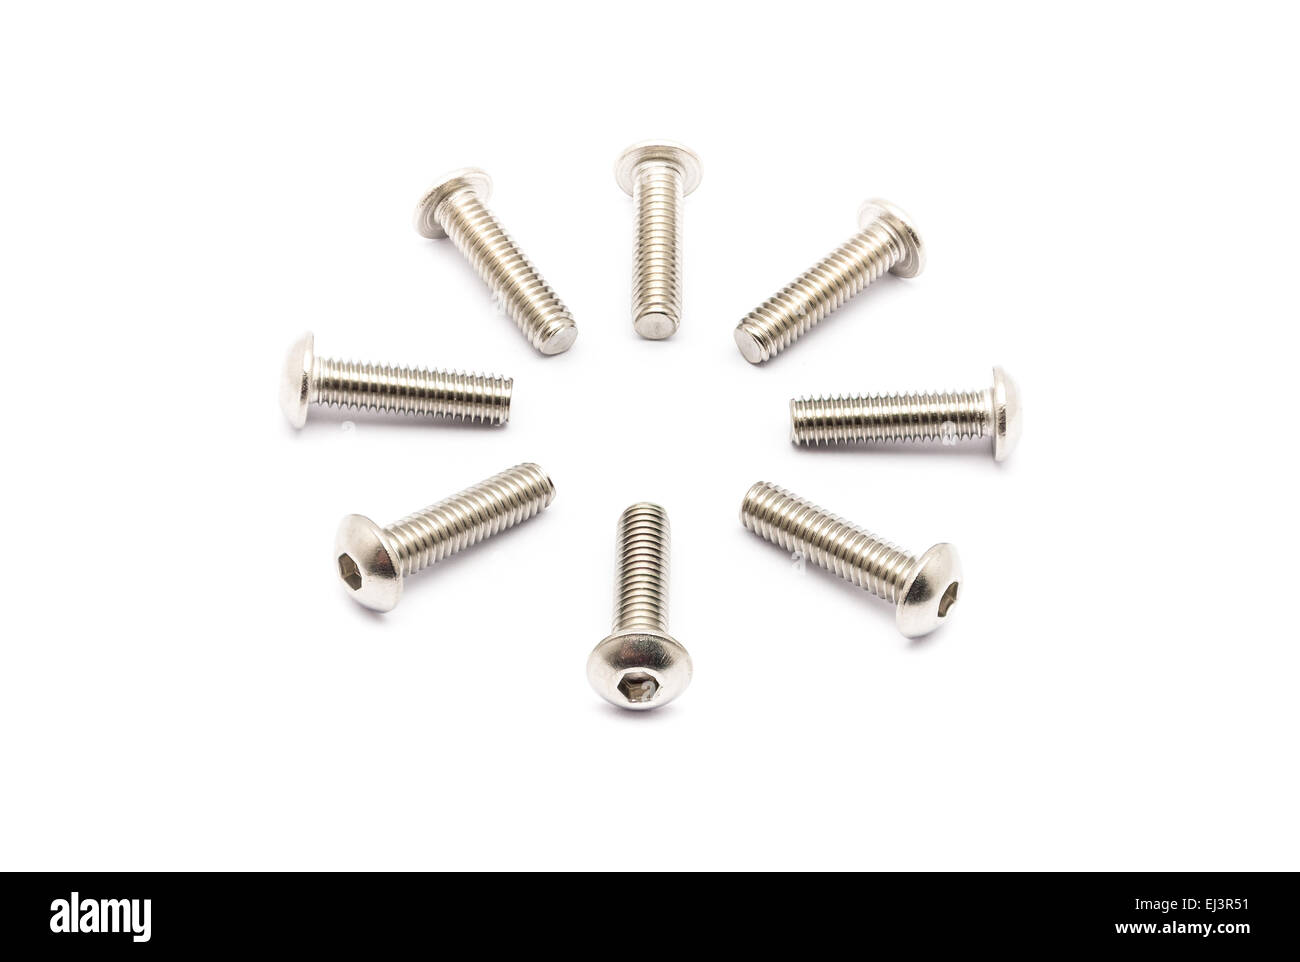 Round Pile of Ball-Hex -Head Stainless Steel Bolts. Stock Photo